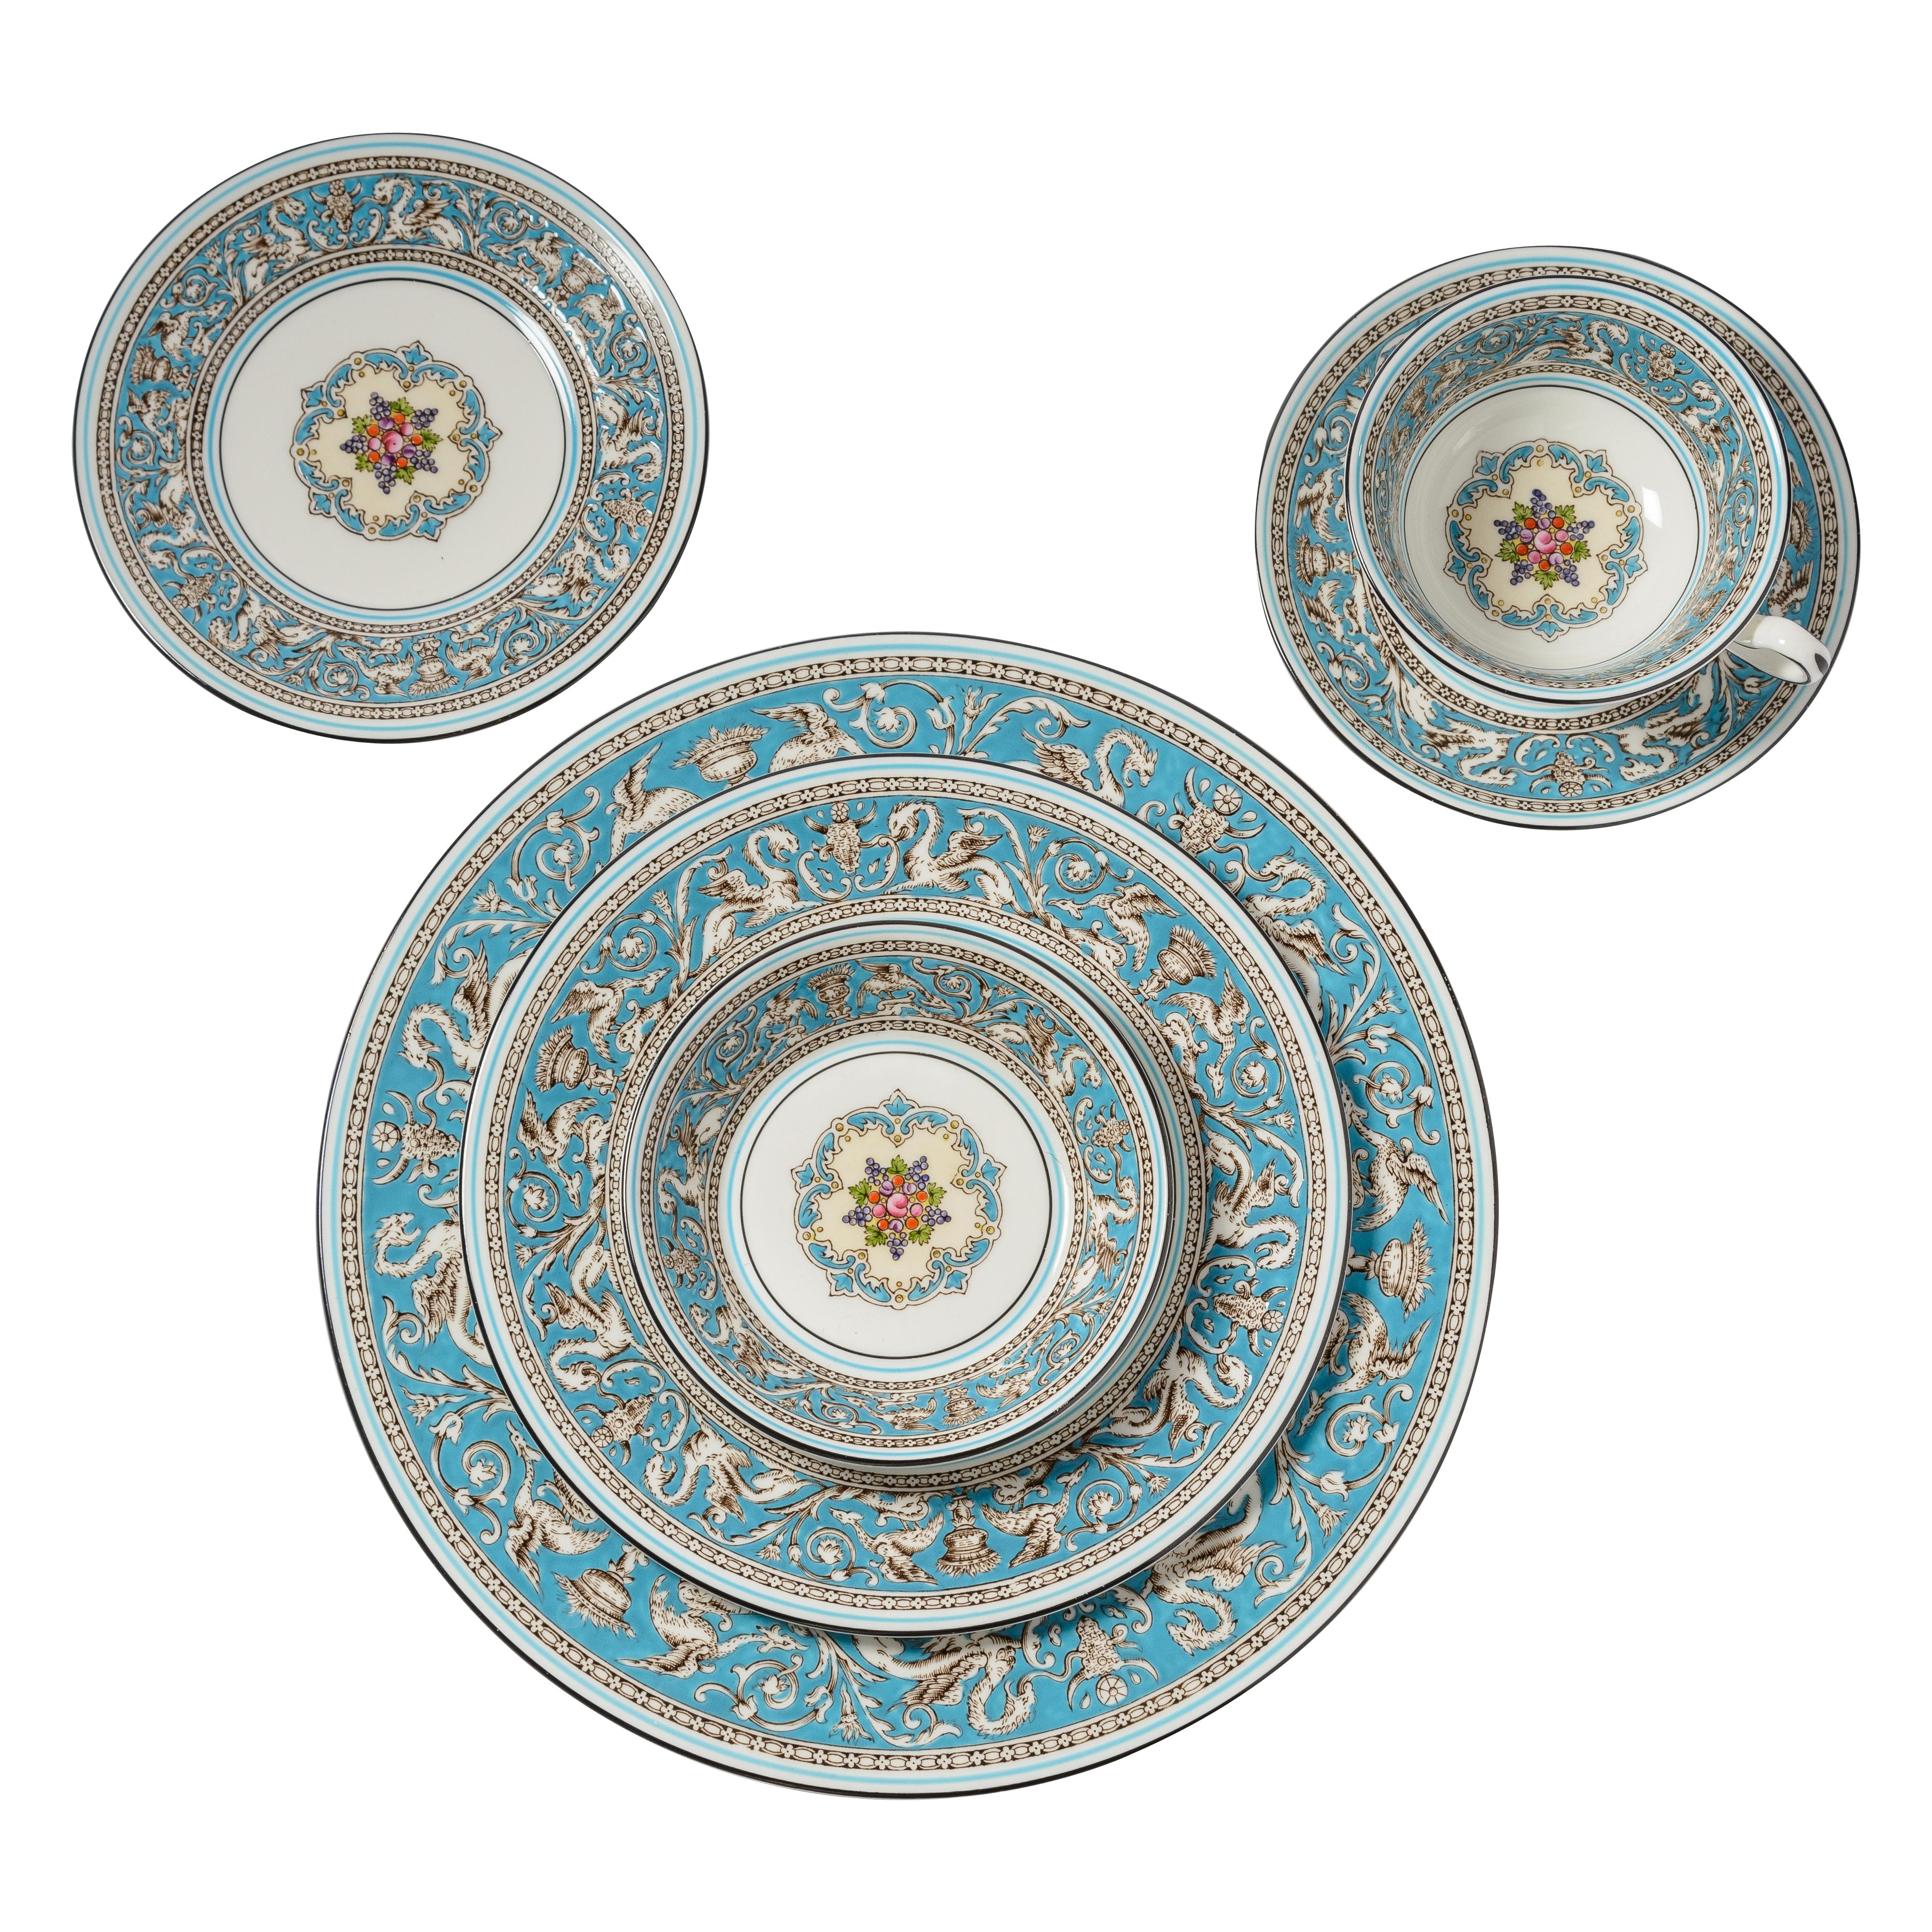 A classic pattern by Wedgwood England: Florentine. This vibrant hand enameled pattern features a lovely medallion center and finely detailed design on crisp white porcelain. The set is in wonderful vintage condition and has:
12 Dinner Plates
12